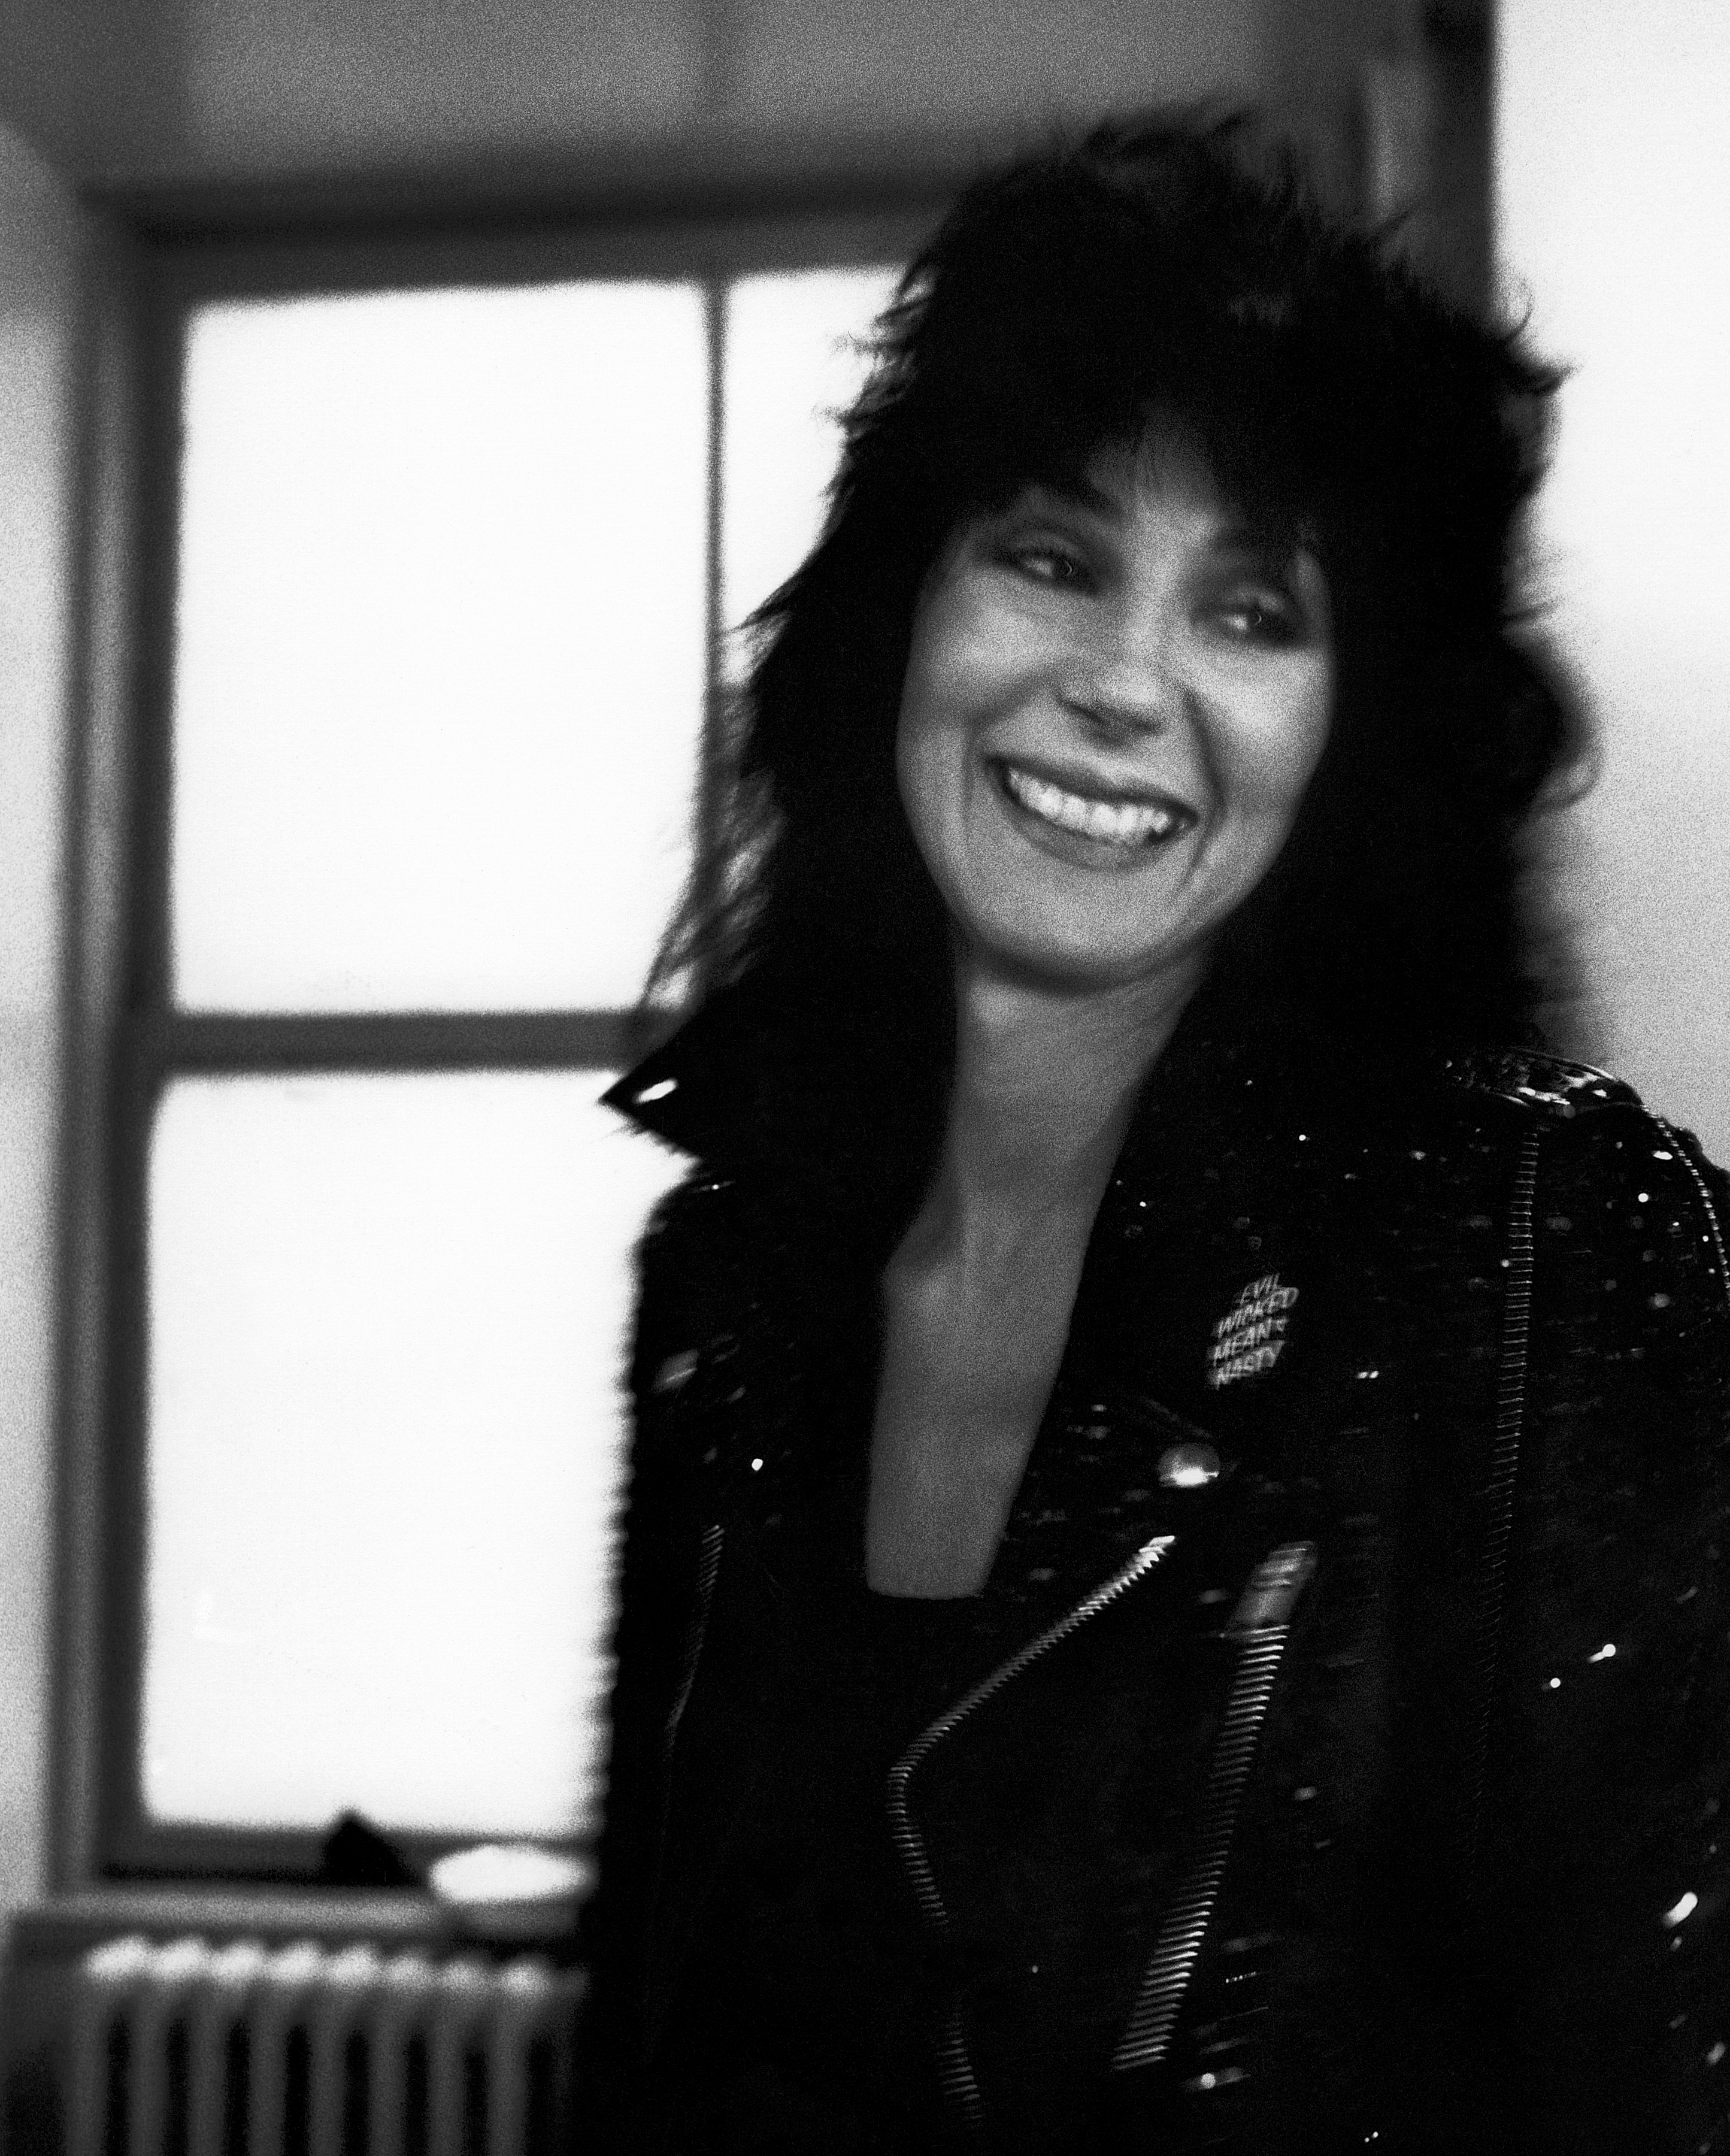 Close-up of Cher smiling by a window